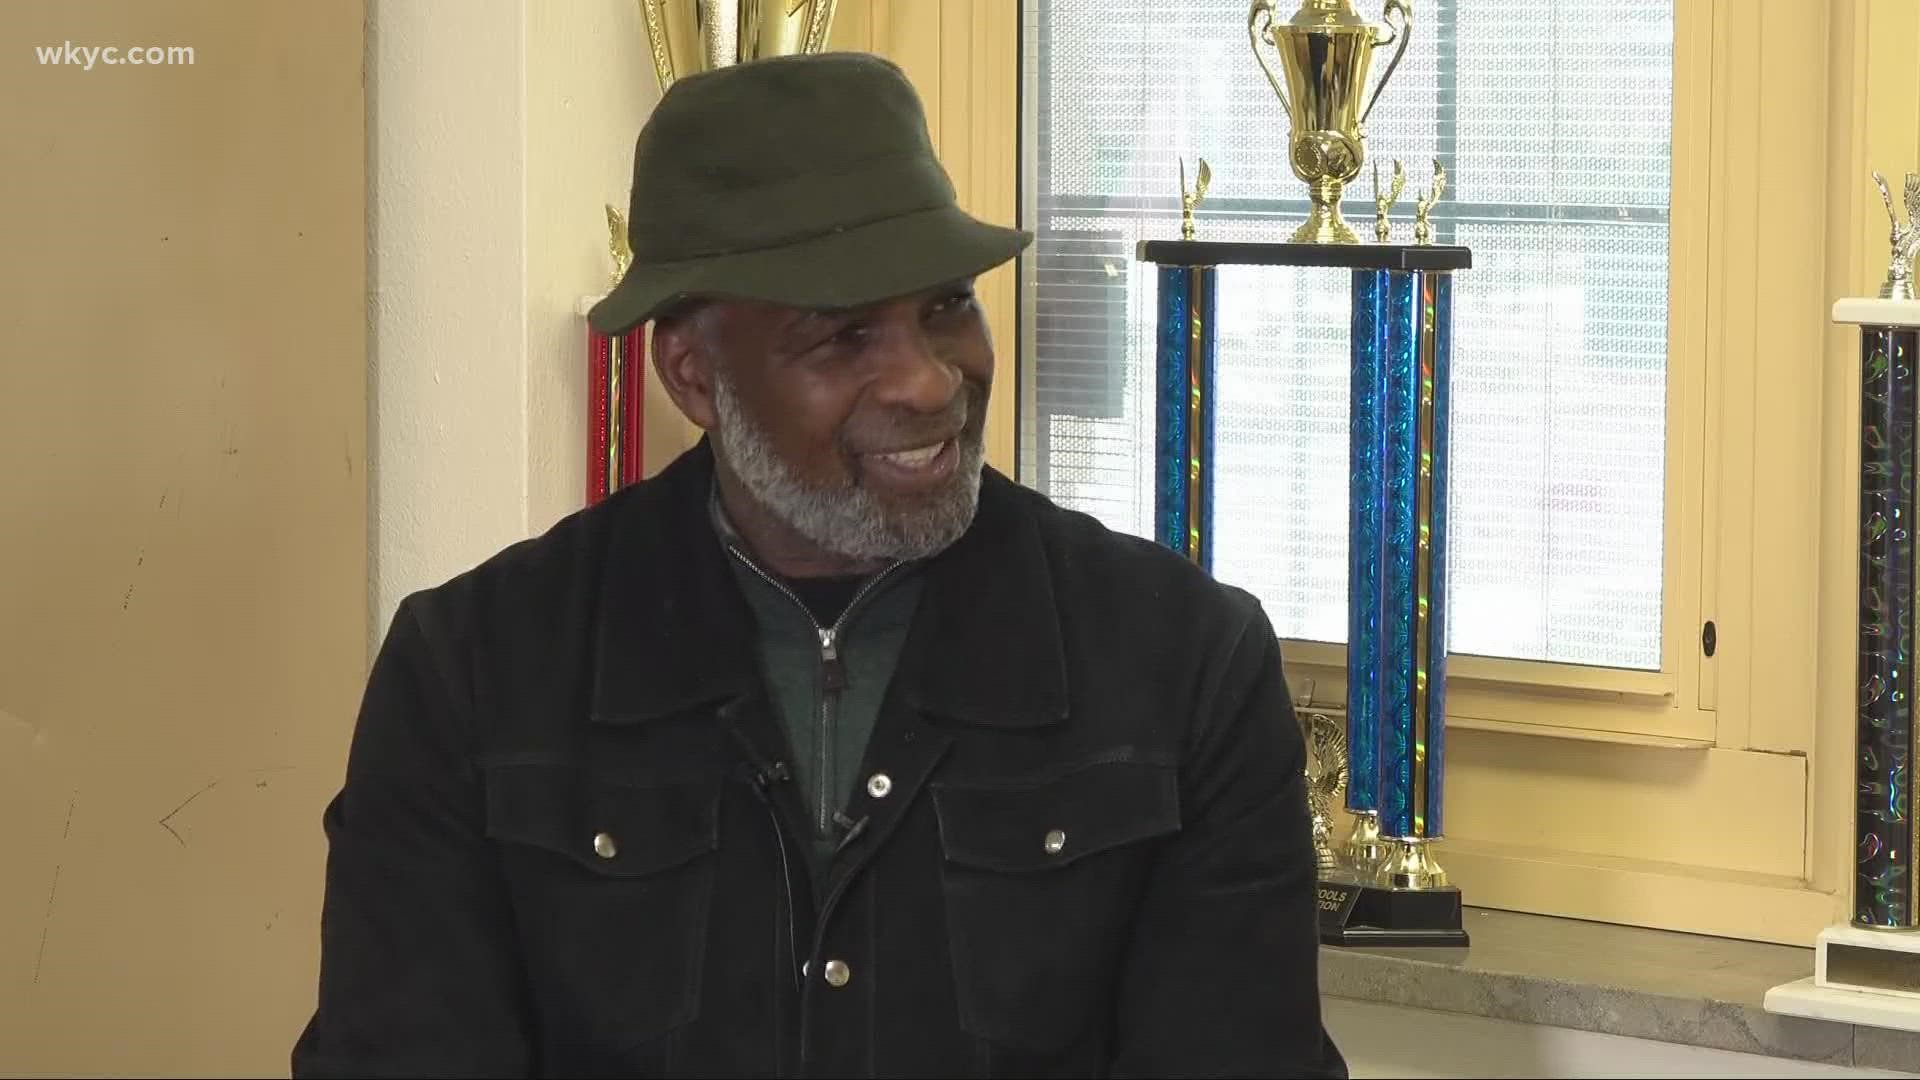 Look who's back in Cleveland! We talk with former NBA star Charles Oakley as he returned to the city ahead of the 2022 NBA All-Star Game.